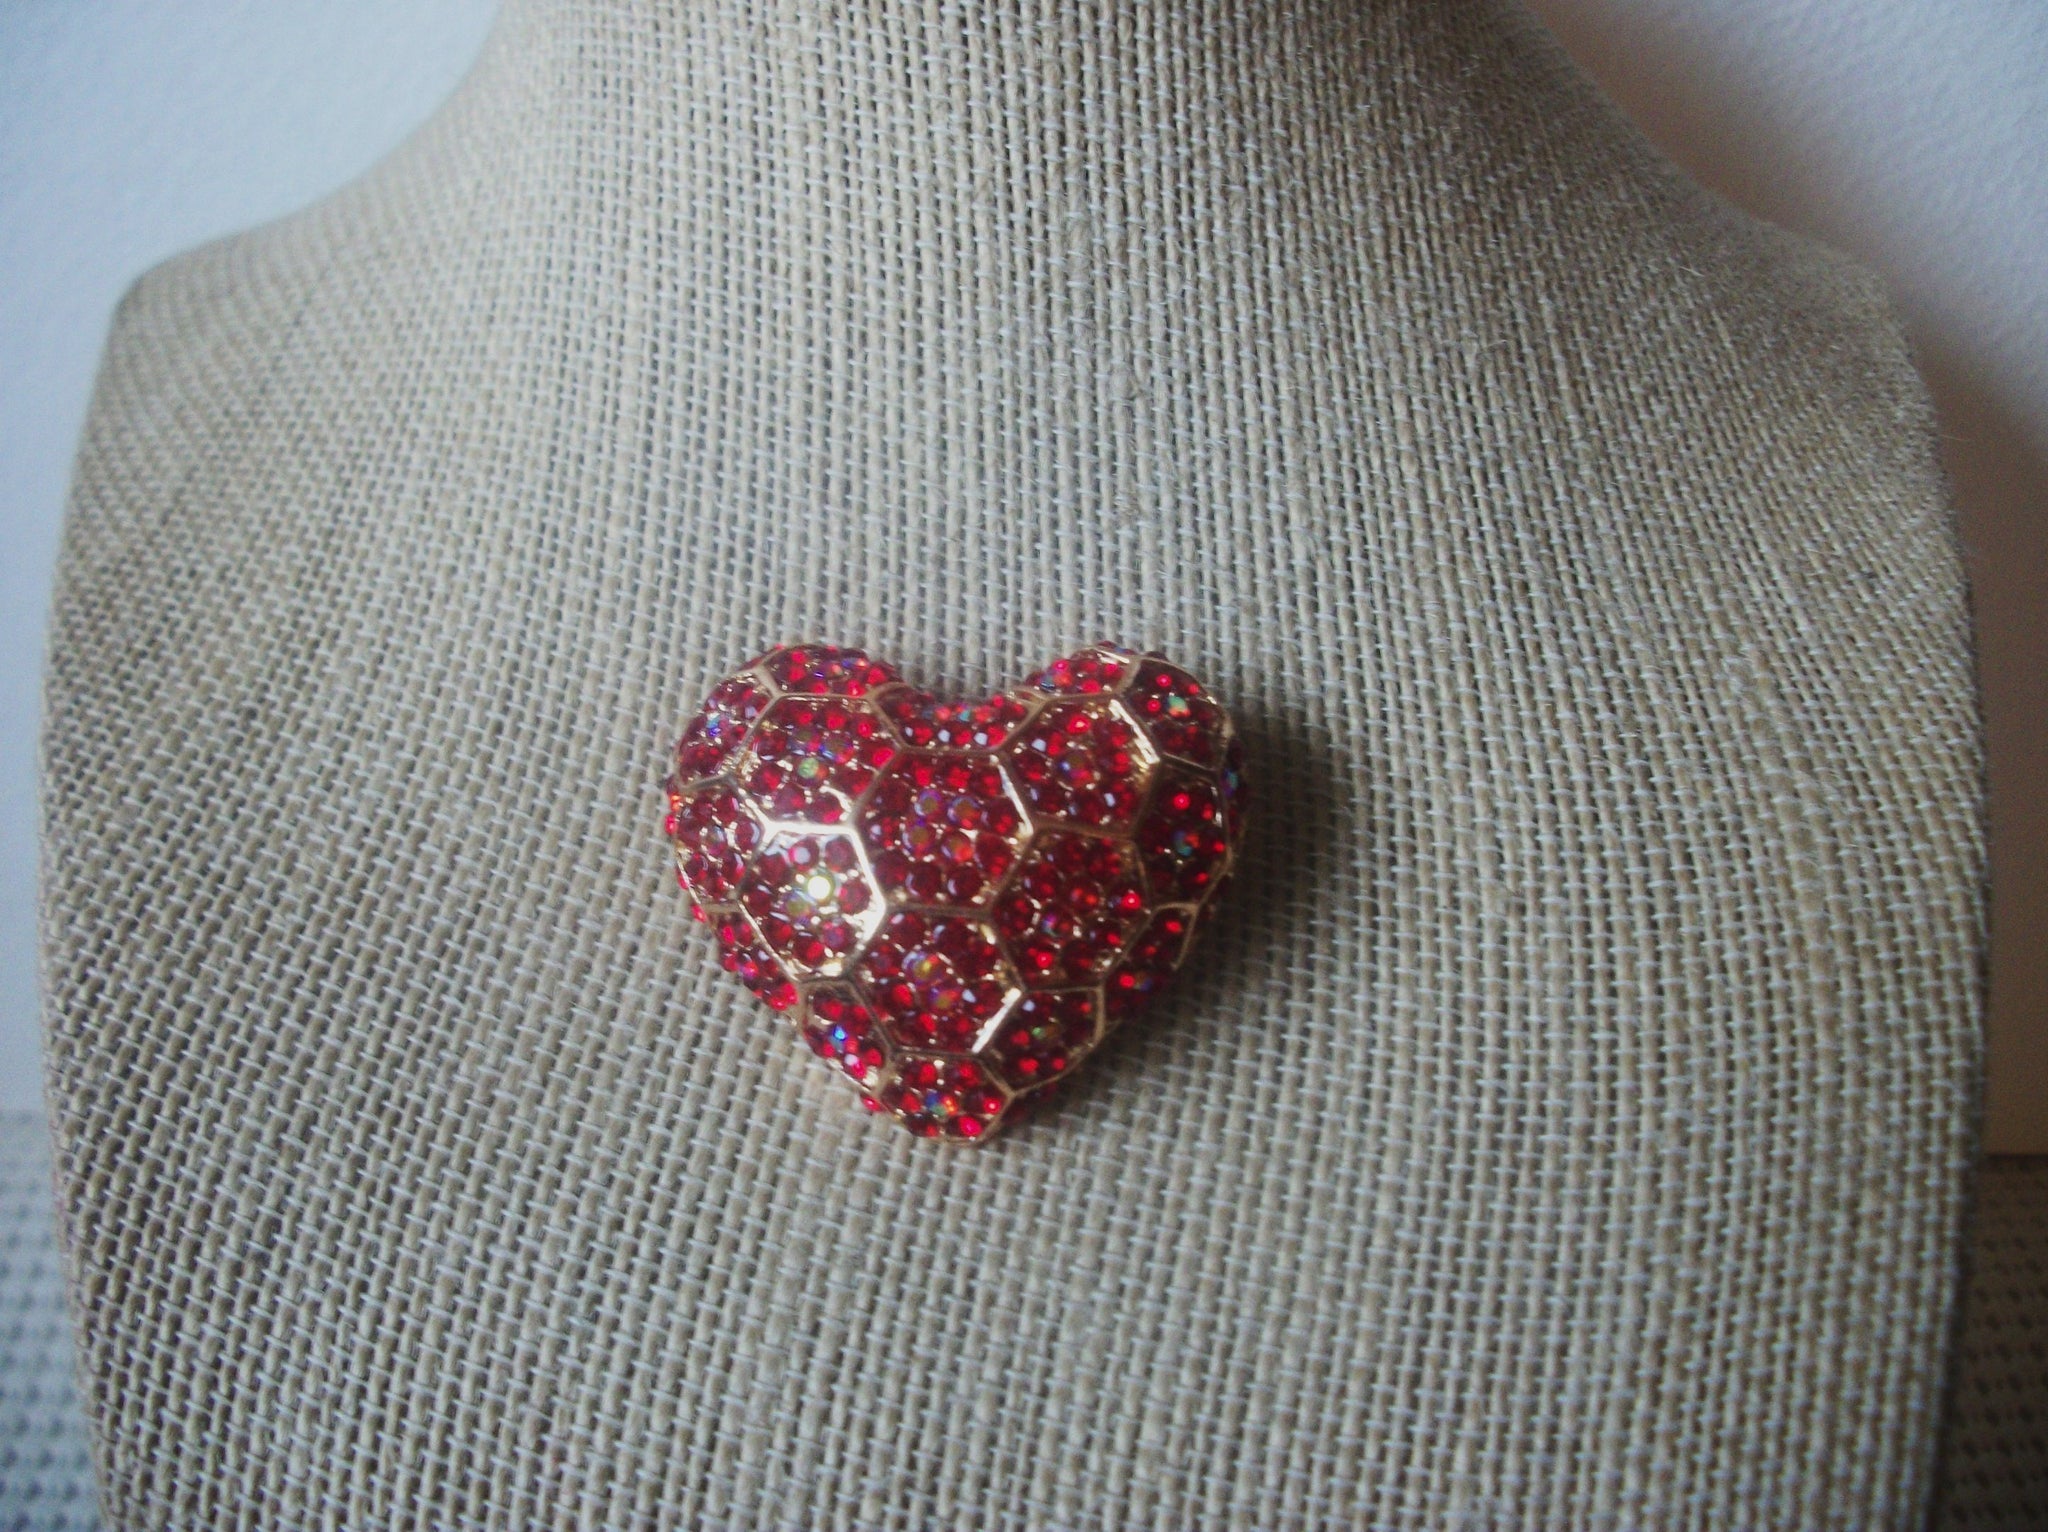 Vintage Jewelry, Stunning Red Crystals, Heart Shaped Love Valentine Gold Tone, Brooch Pin and Pendant 022621